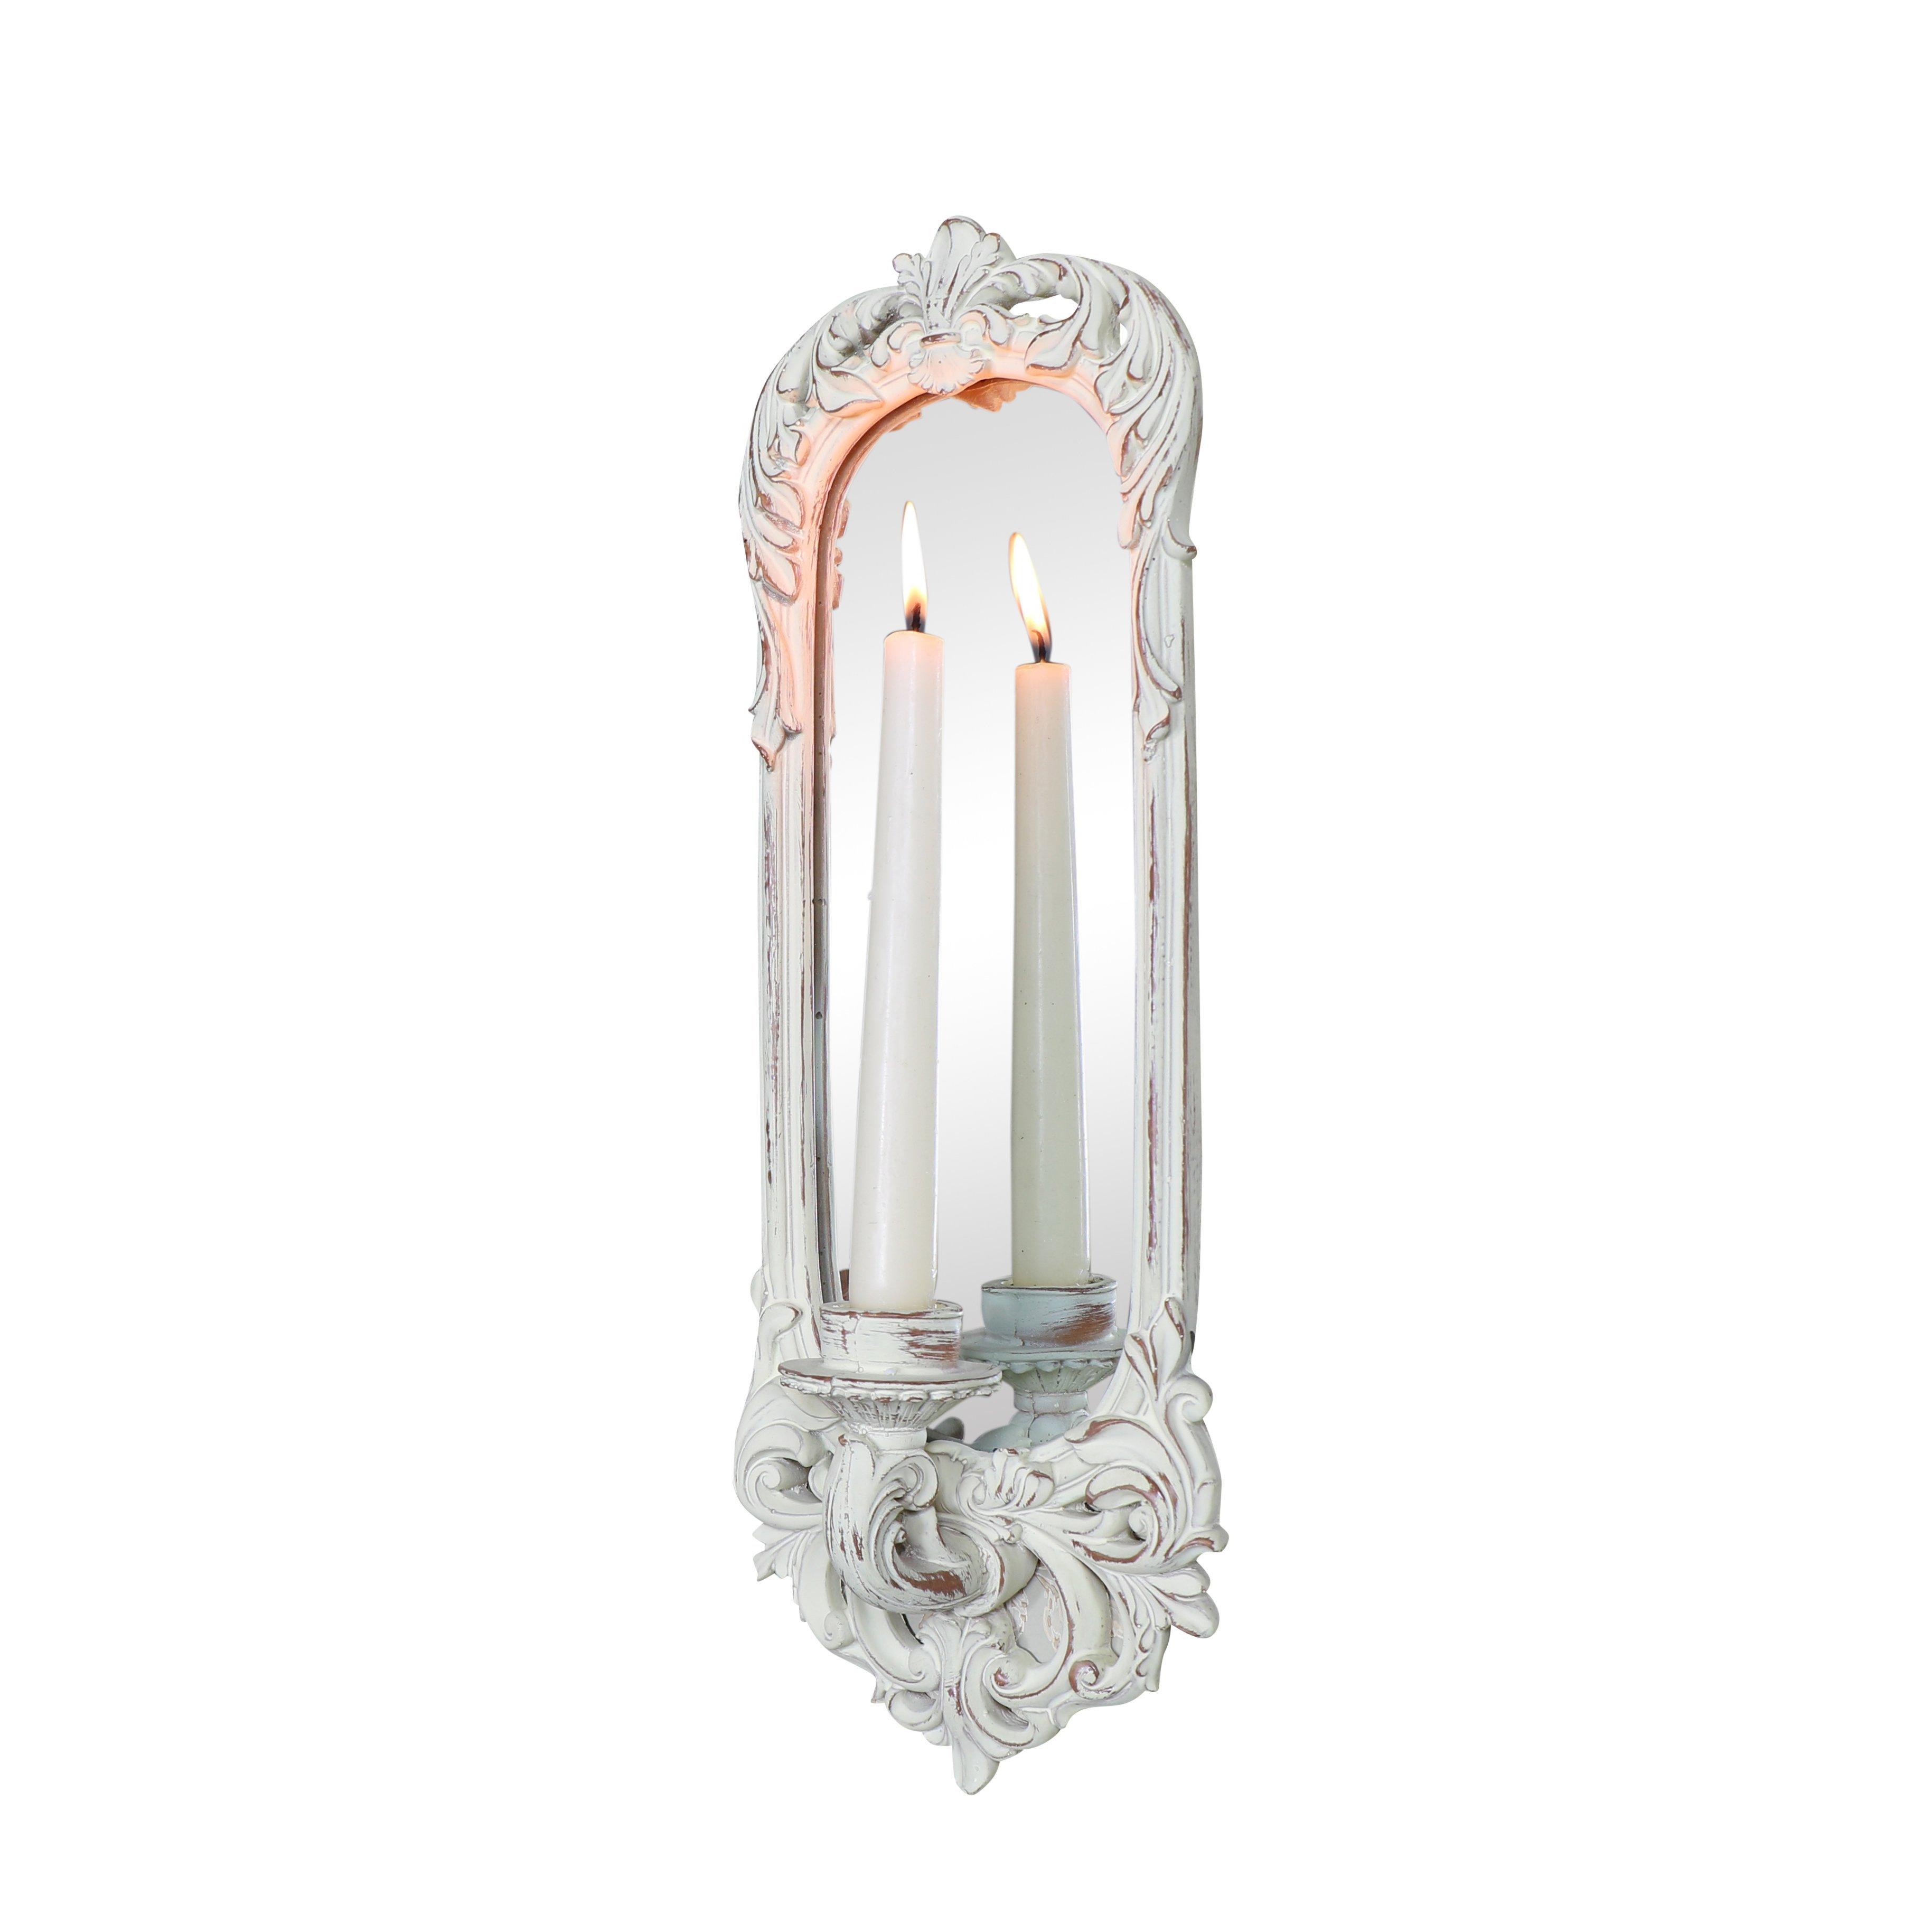 Ornate White Wall Mirror Candle Sconce